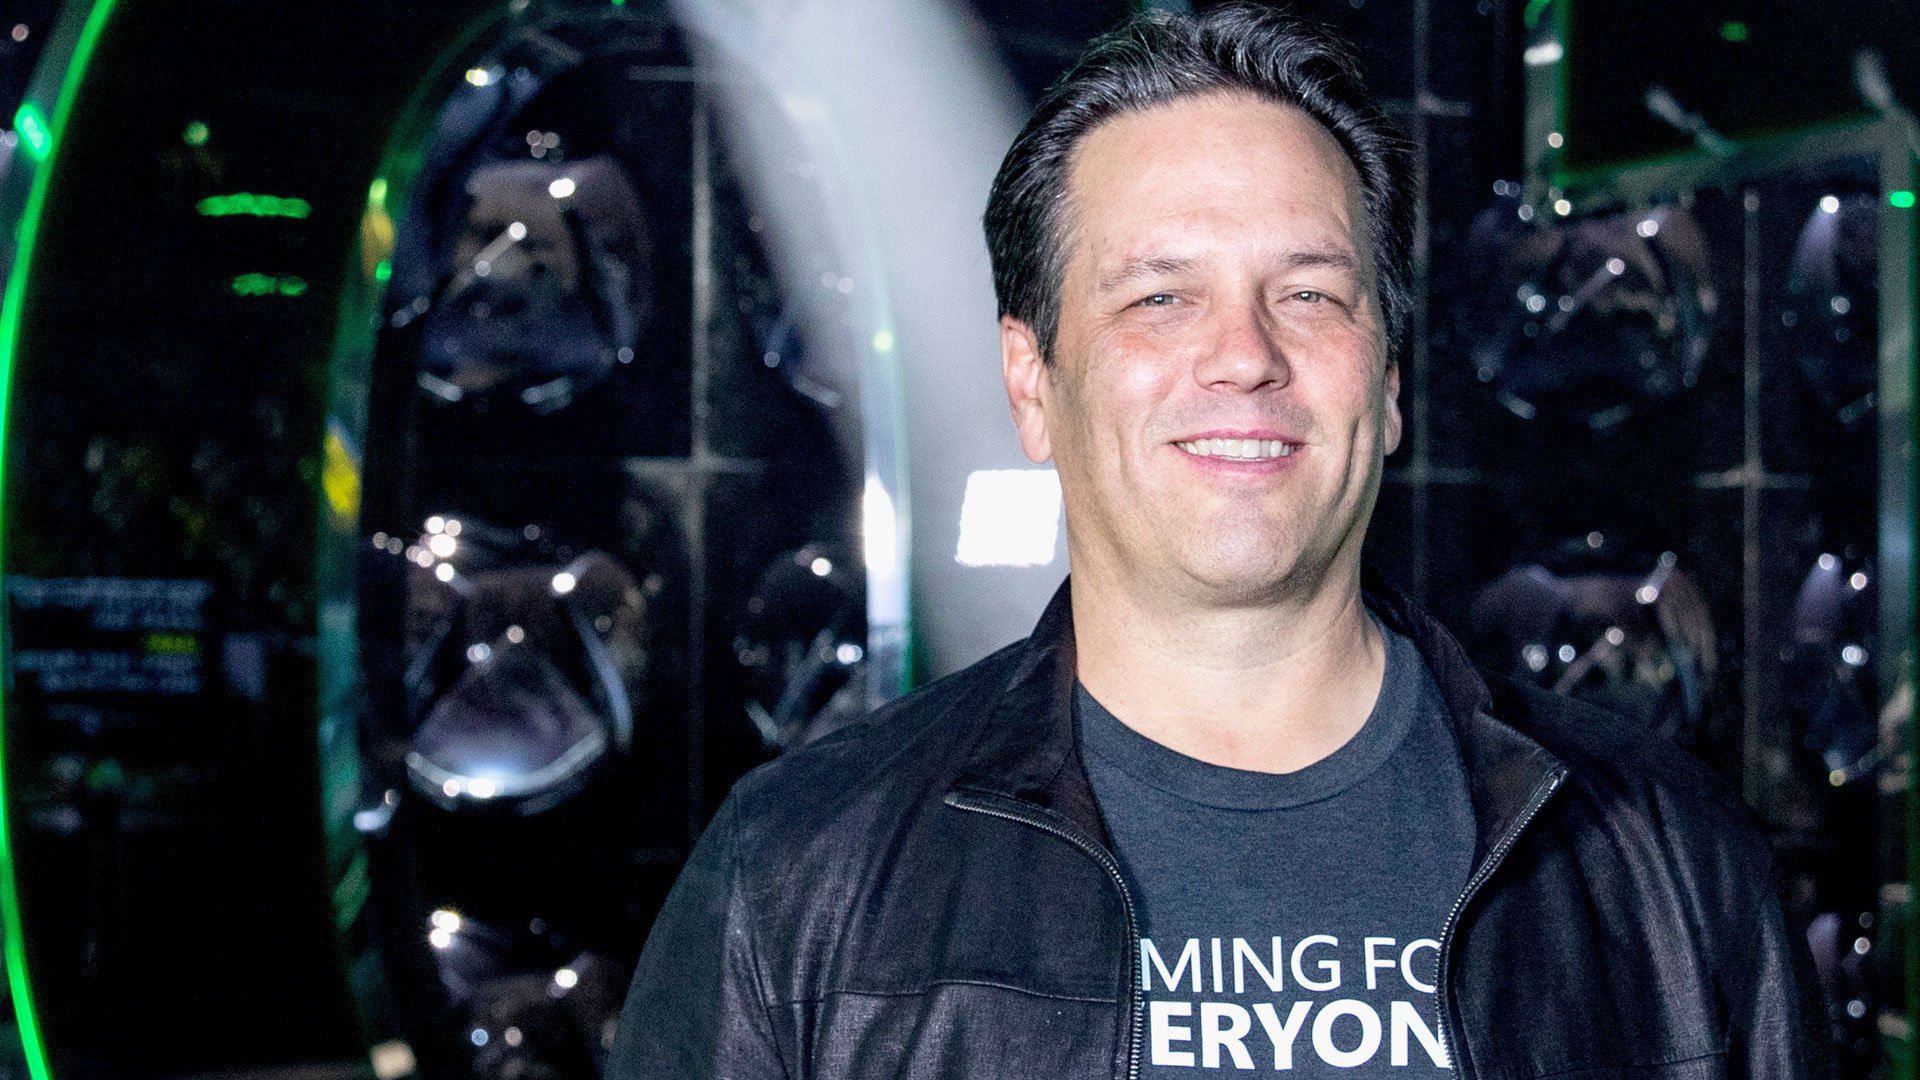 Phil Spencer: Xbox Series X Being 'Held Back' Is A Meme Created By